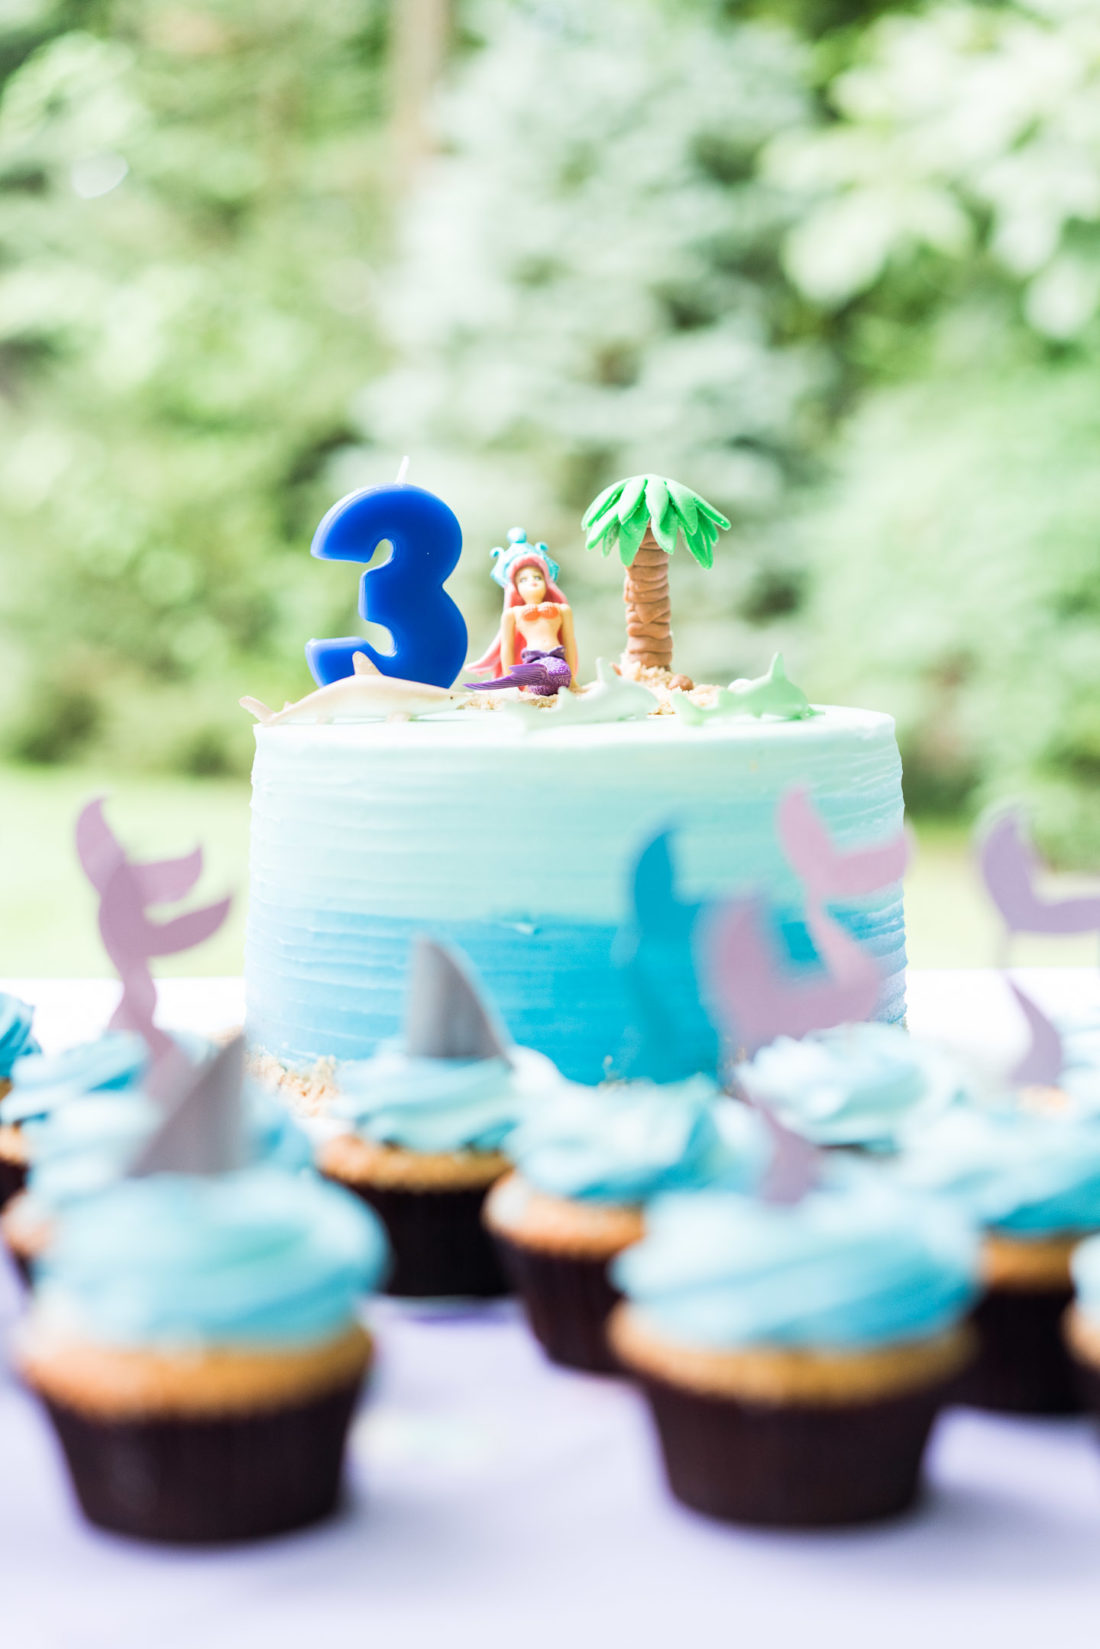 Marlowe Martino's Mermaid and Shark themed birthday cake sits on a table surrounded by cupcakes